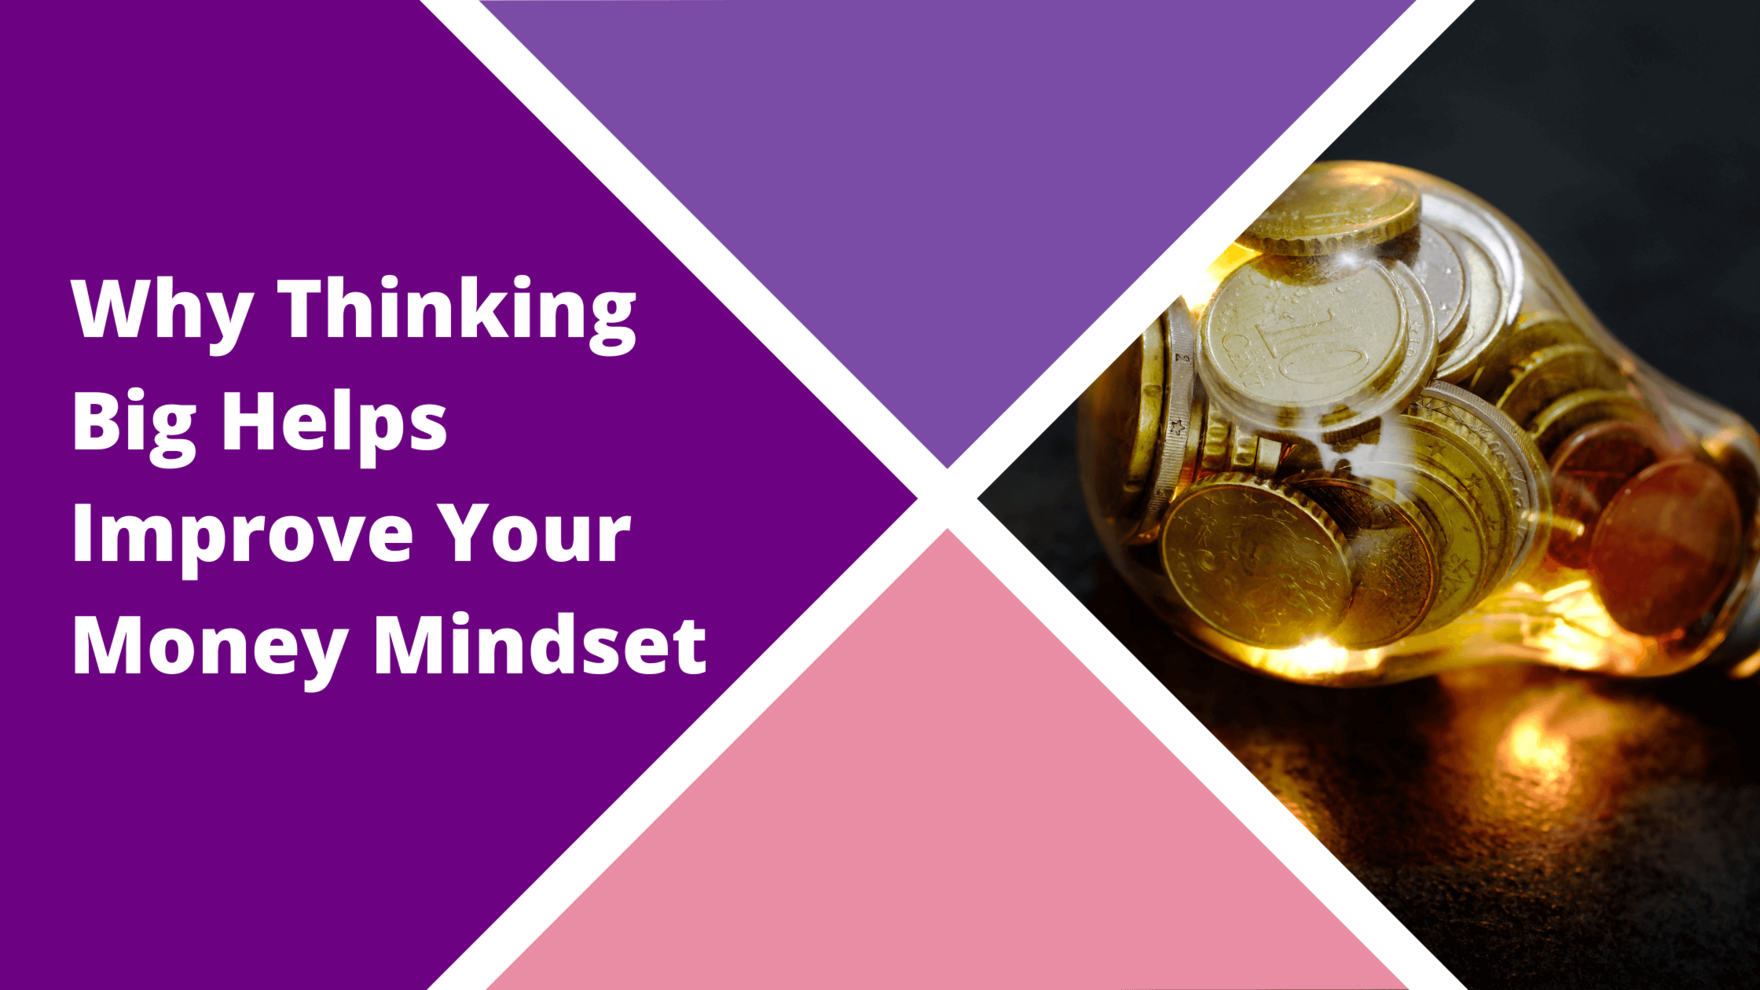 Think Big Blog - Why thinking big helps improve your money mindset and, therefore, your chances of financial success